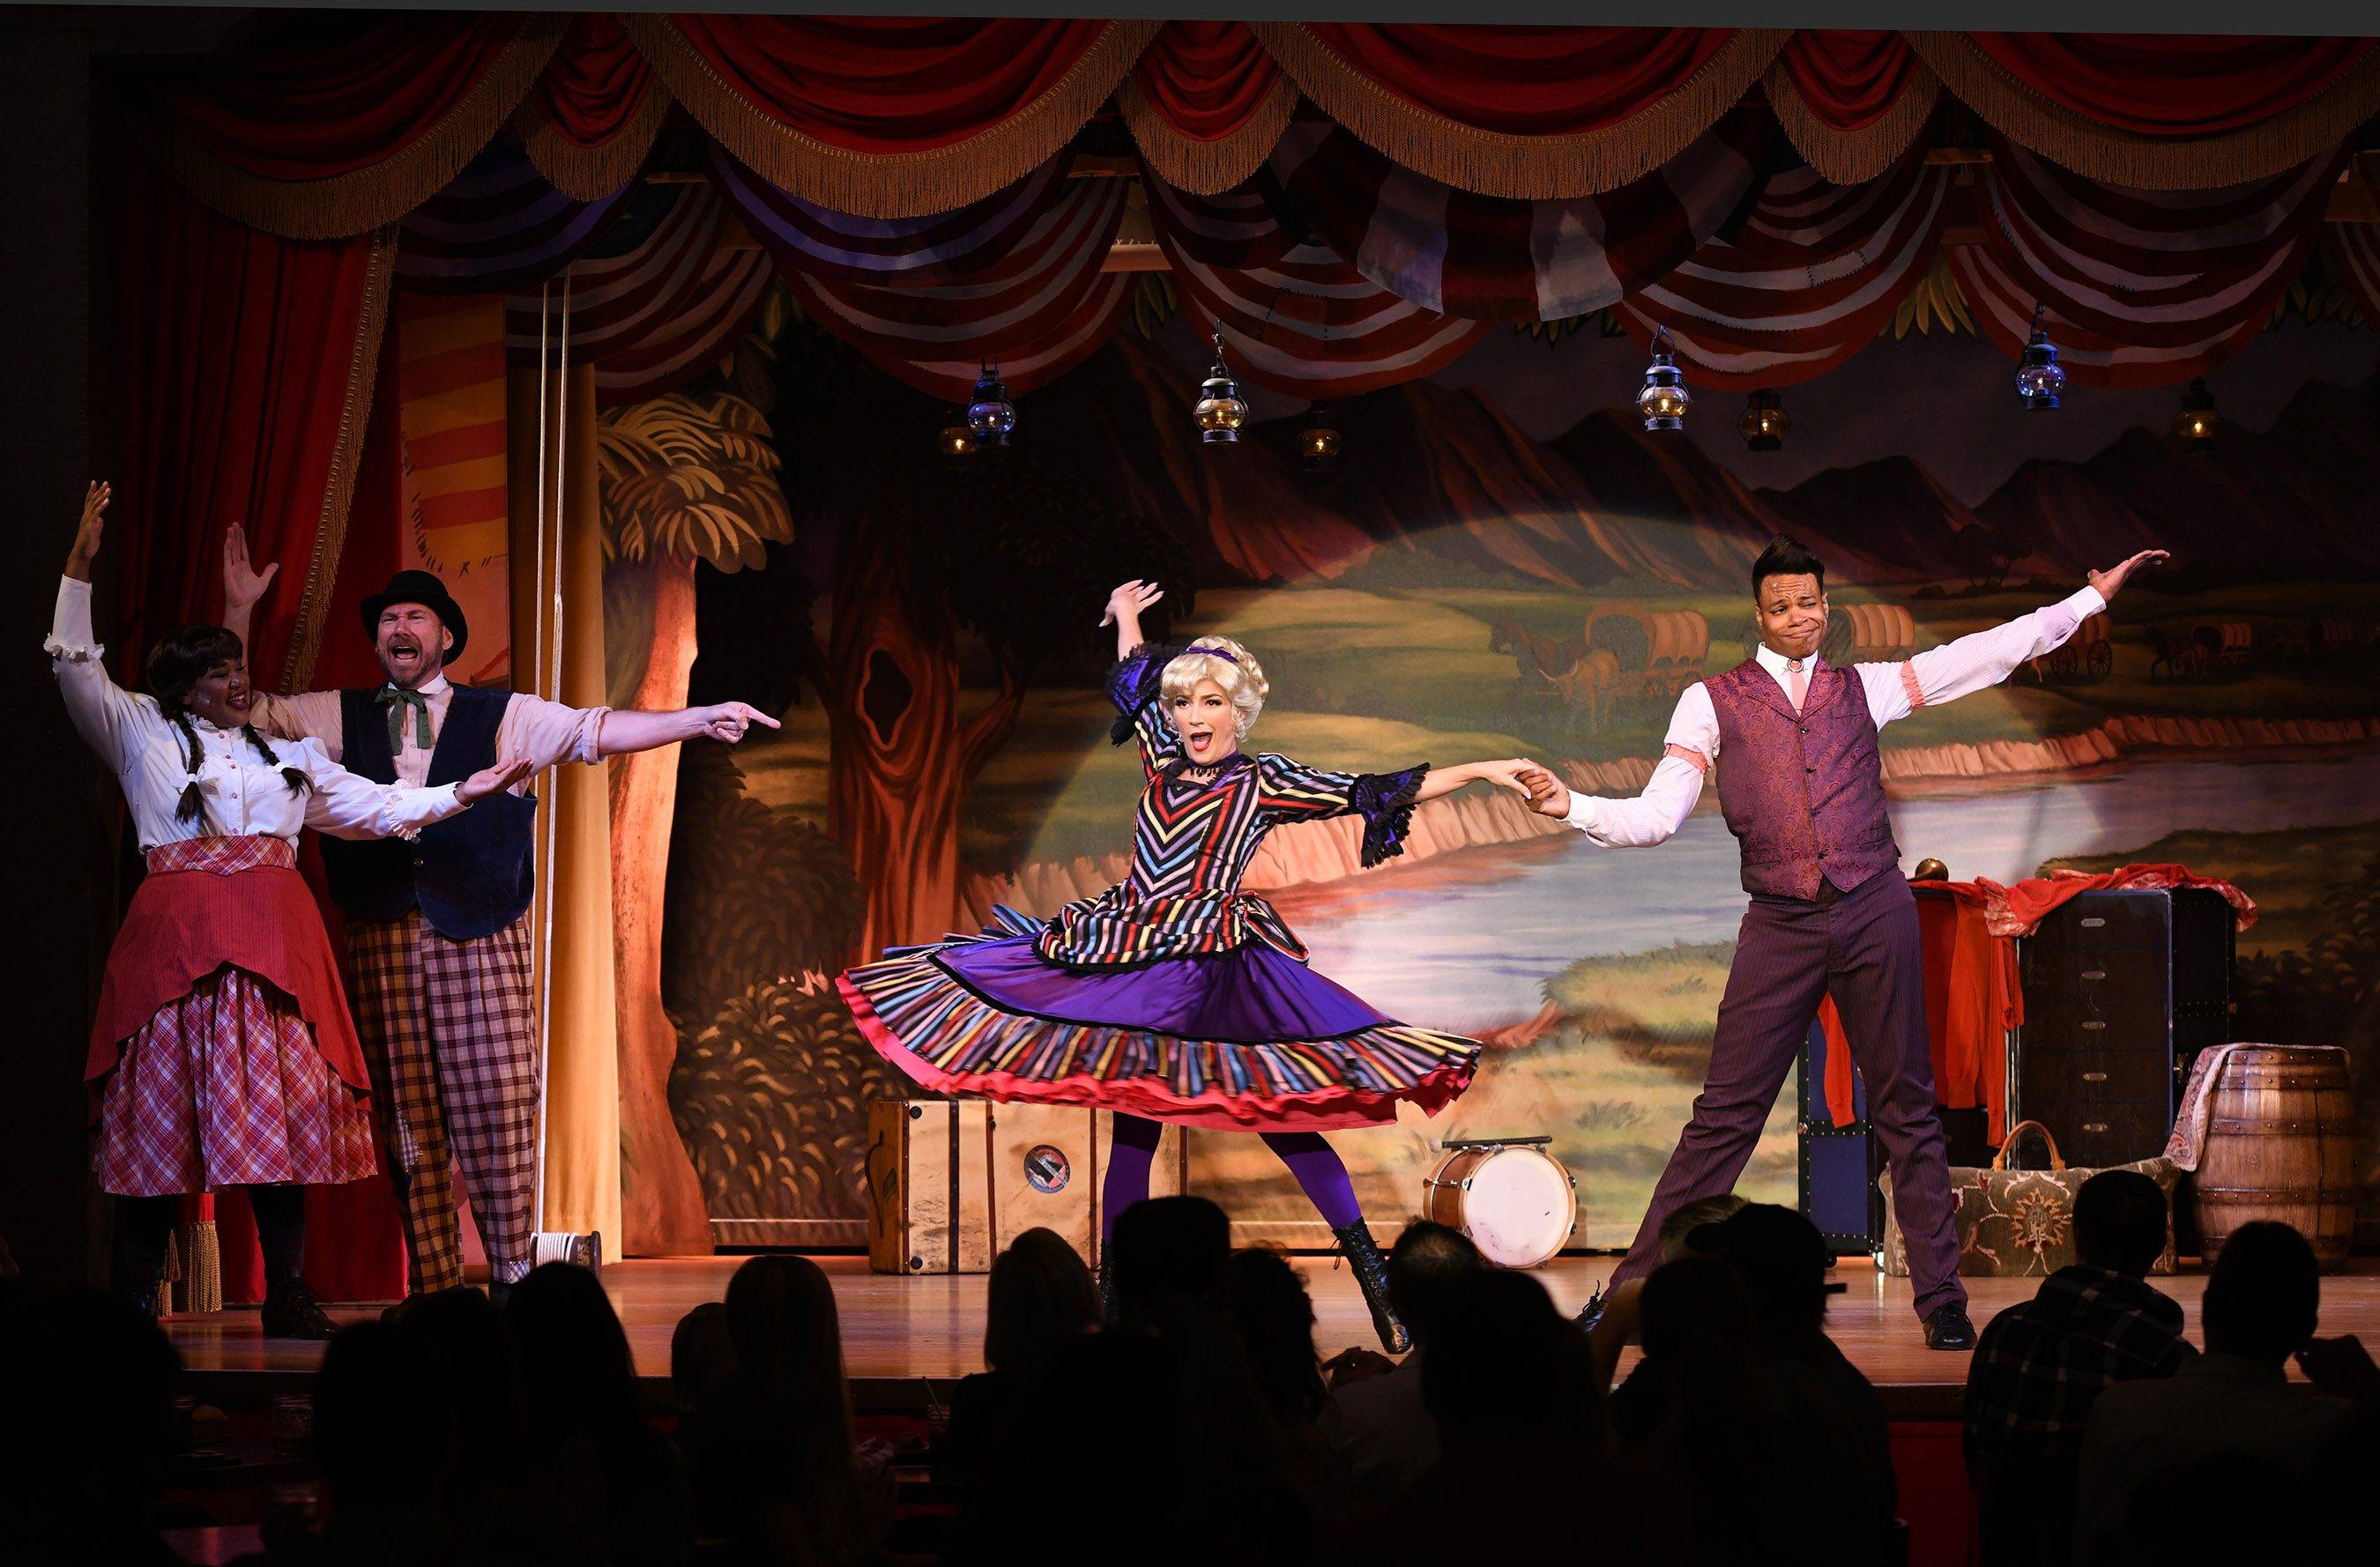 Performances of Hoop-Dee-Doo Musical Revue have been cancelled for Wednesday, November 9 through Friday, November 11